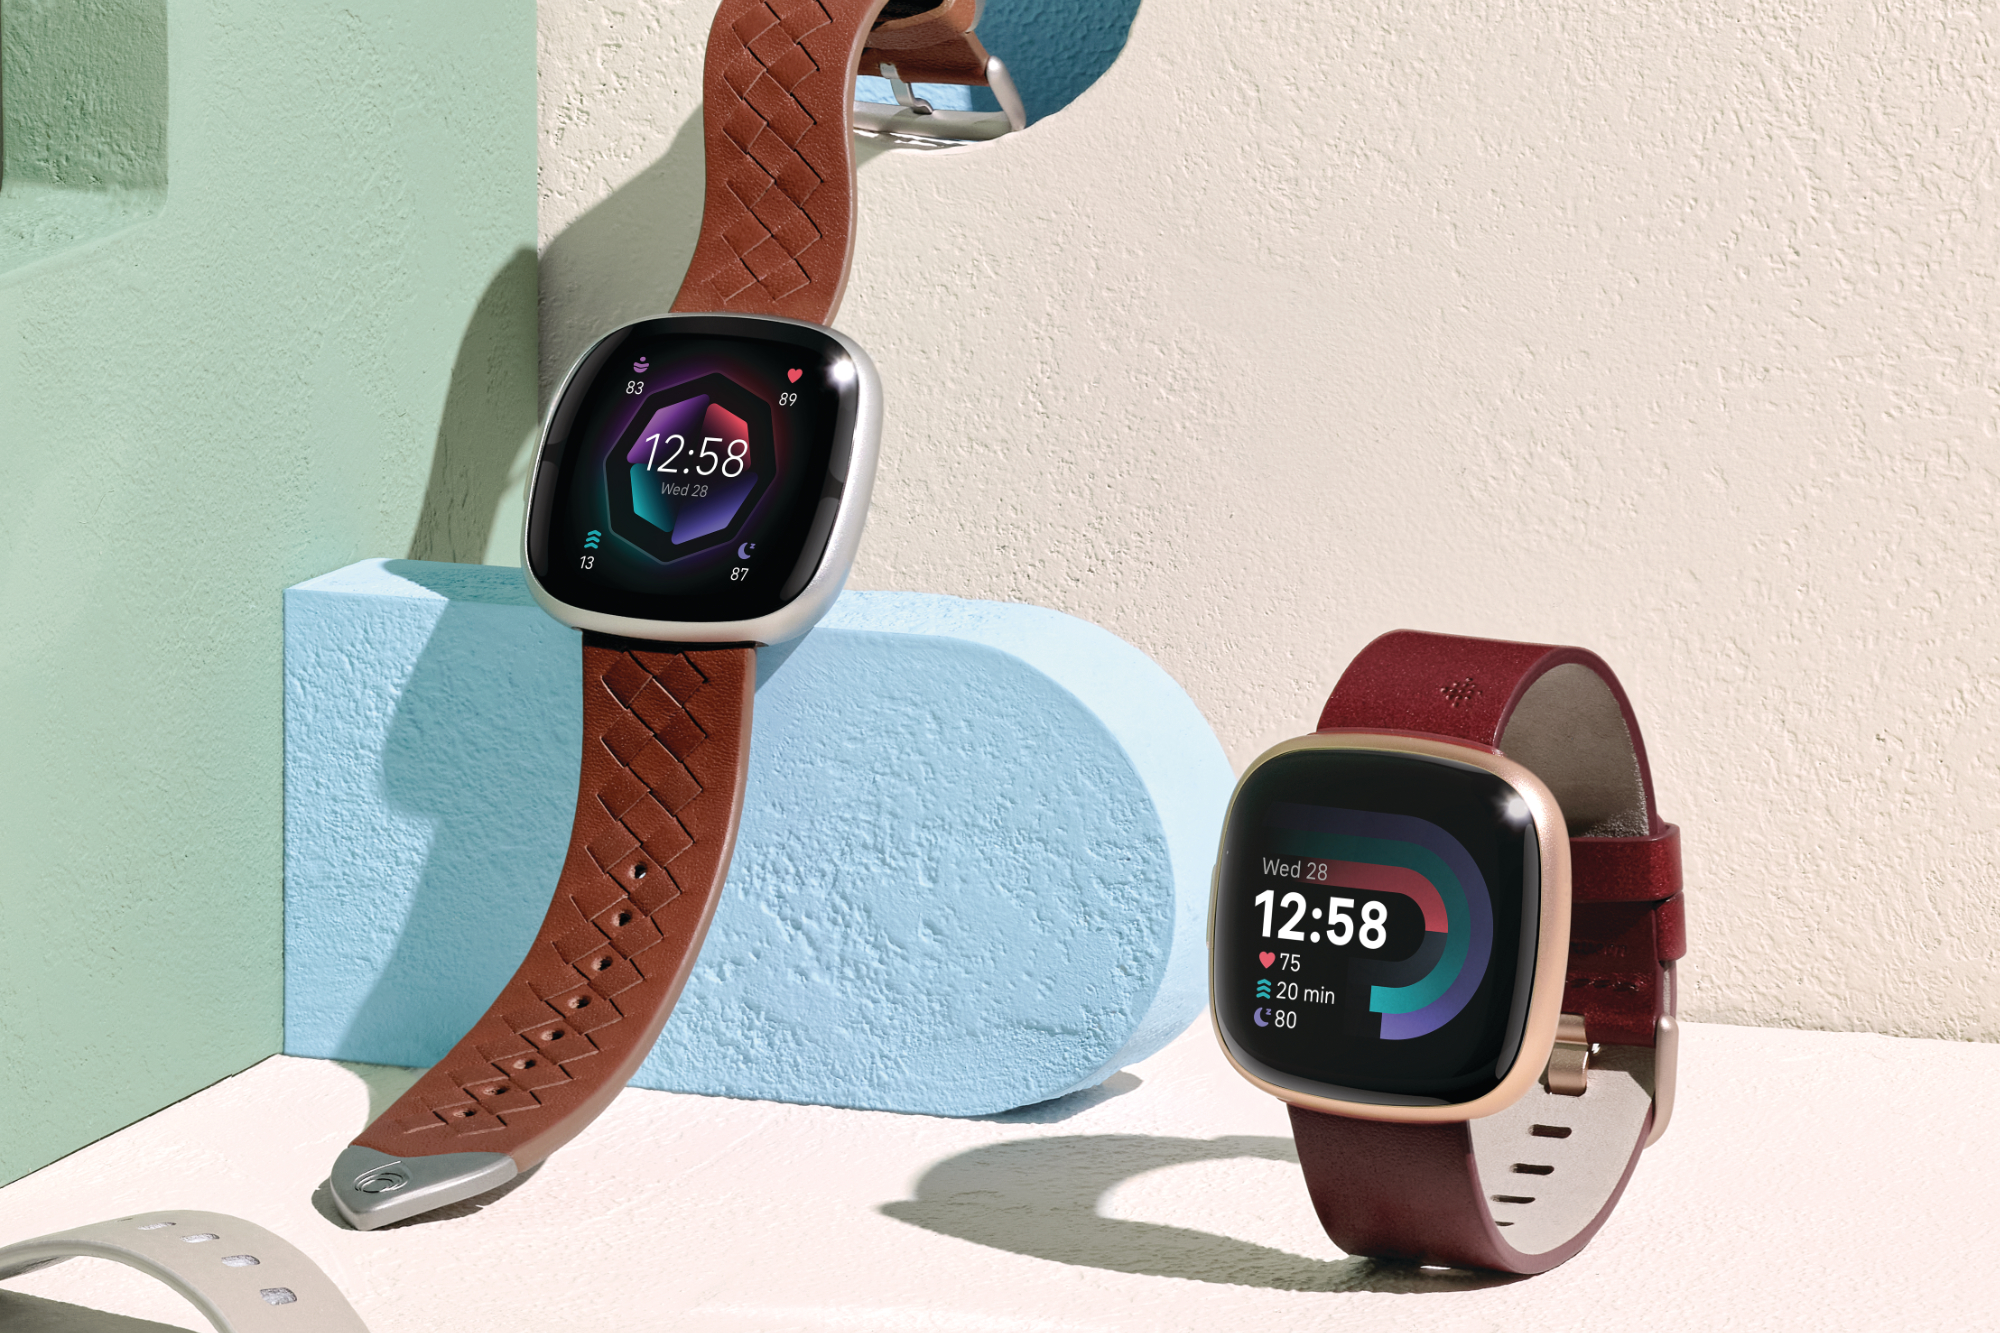 Best Fitbit Black Friday Deals: Shop the early sales
now